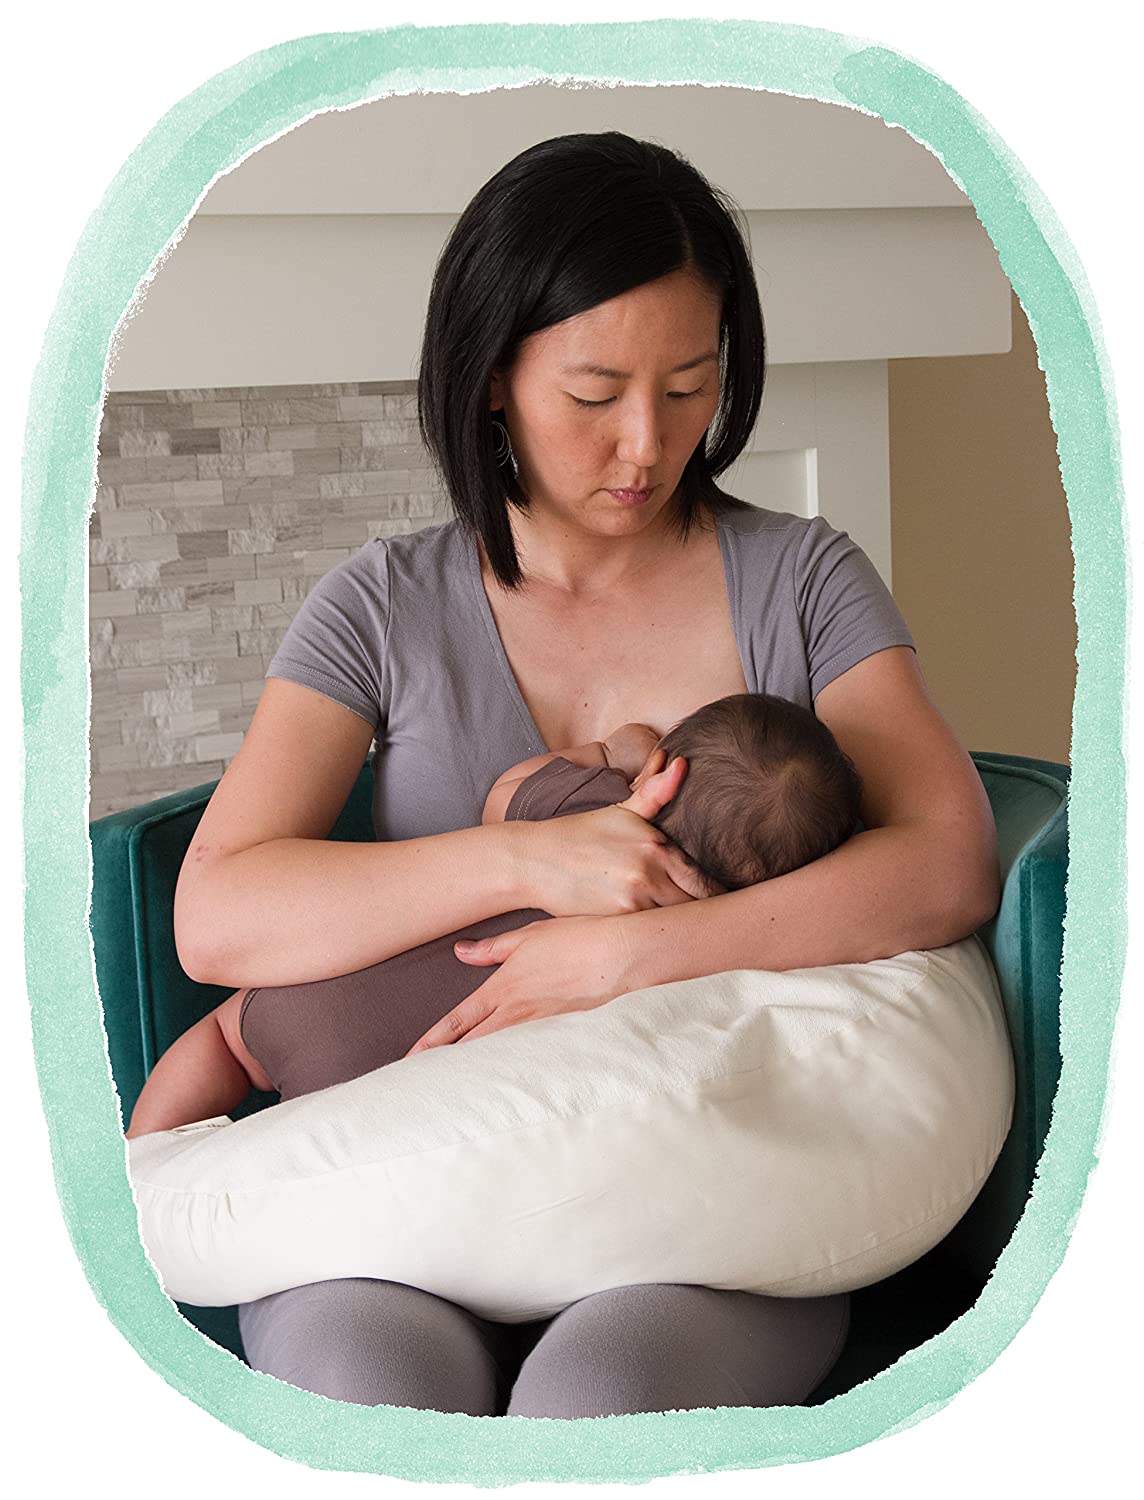 The Nesting Pillow - Organic Nursing Pillow with Washable Slip Cover